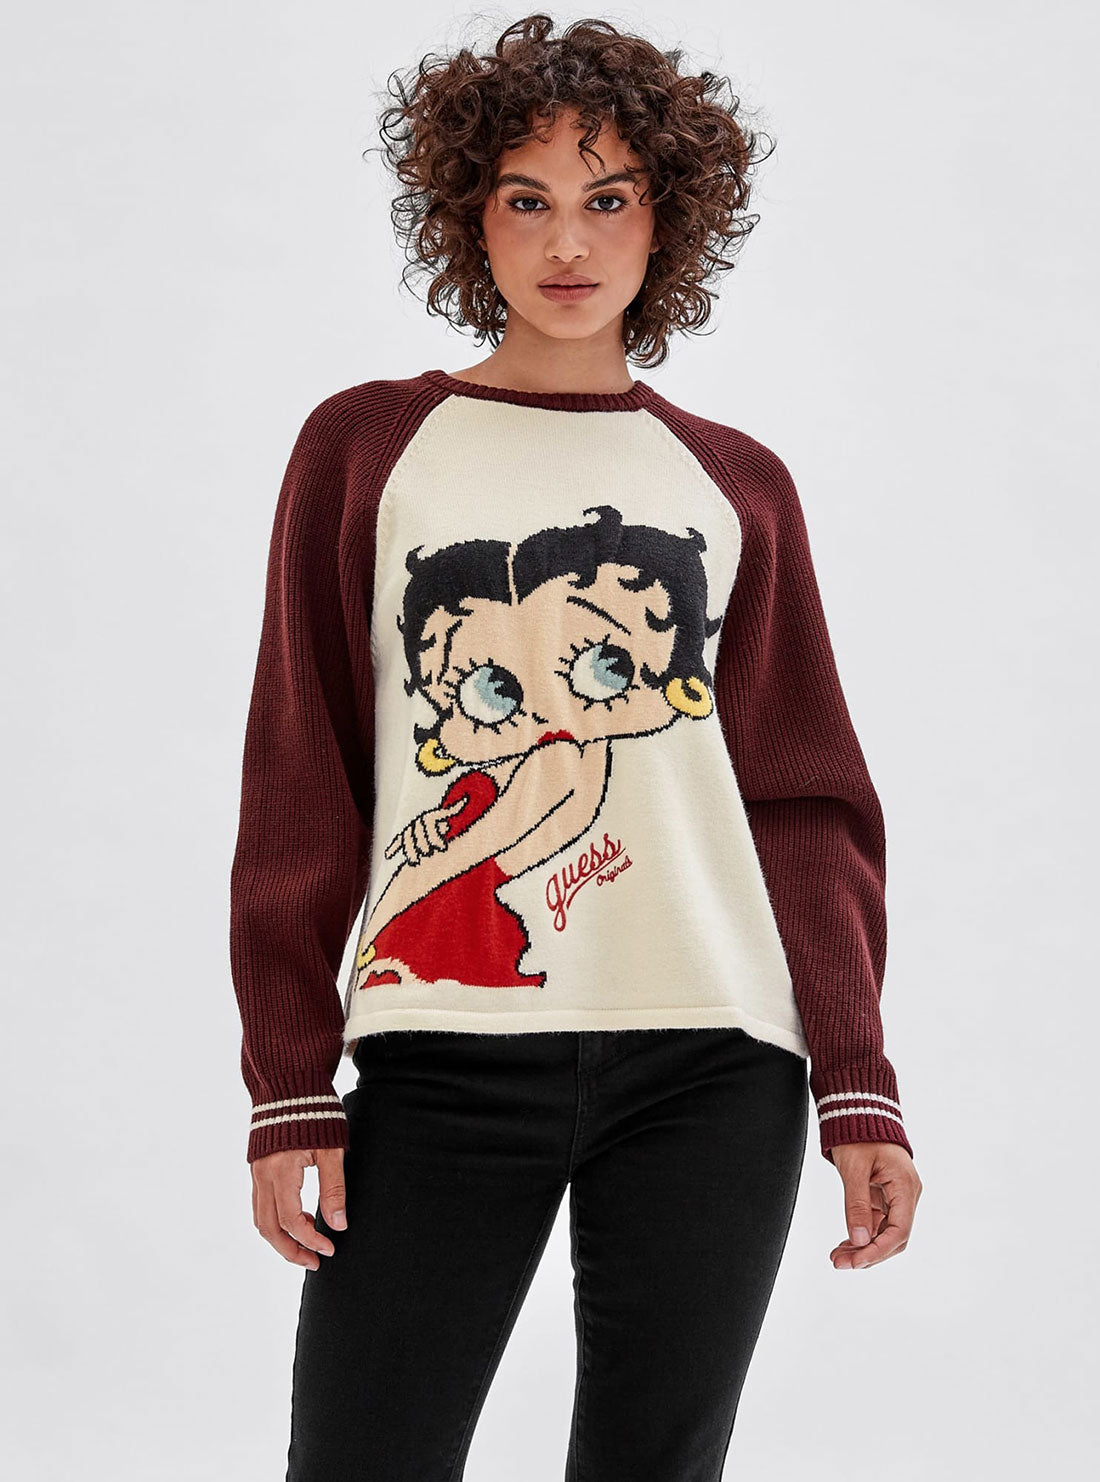 GUESS Women's Guess Originals x Betty Boop Vino Intarsia Knit Top W2BR02Z3120 Front View